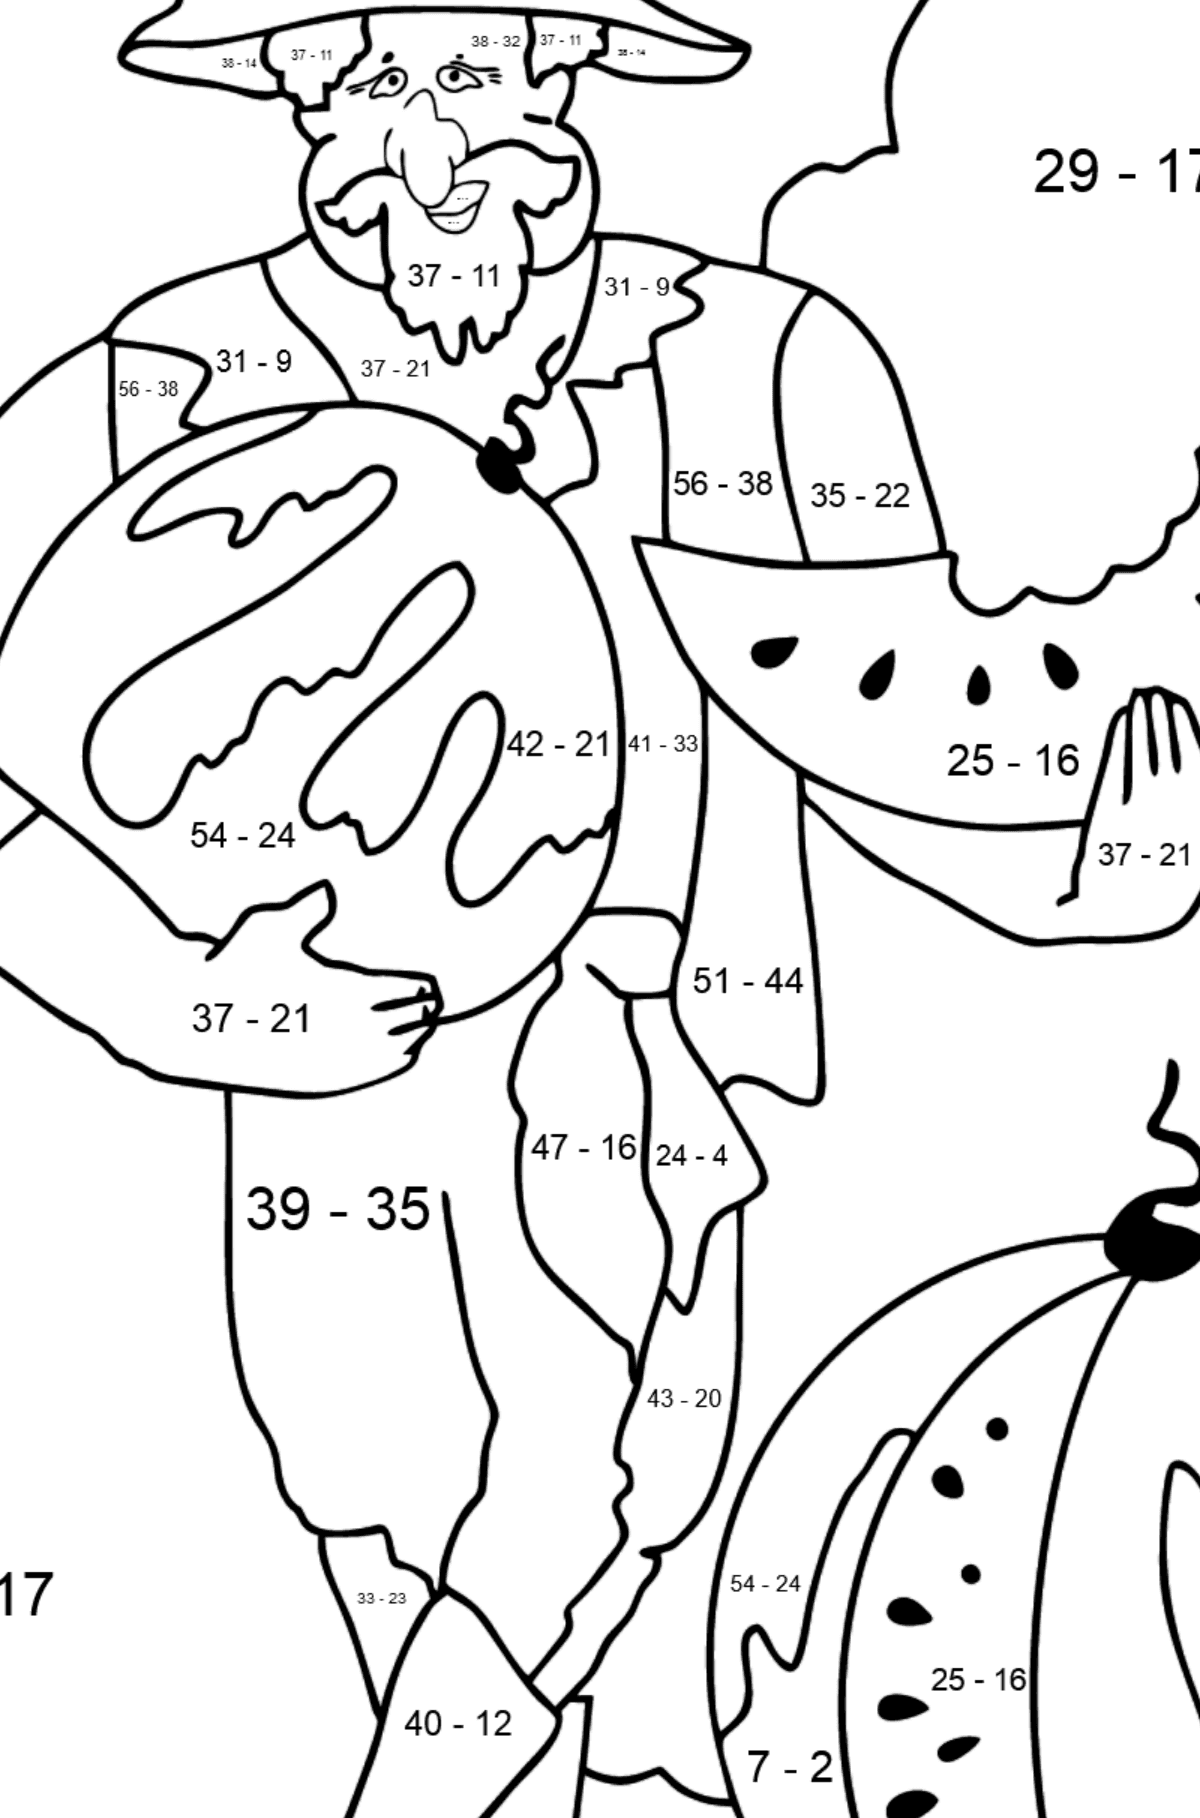 Coloring Page - A Pirate is Sharing a Ripe Watermelon - Math Coloring - Subtraction for Kids